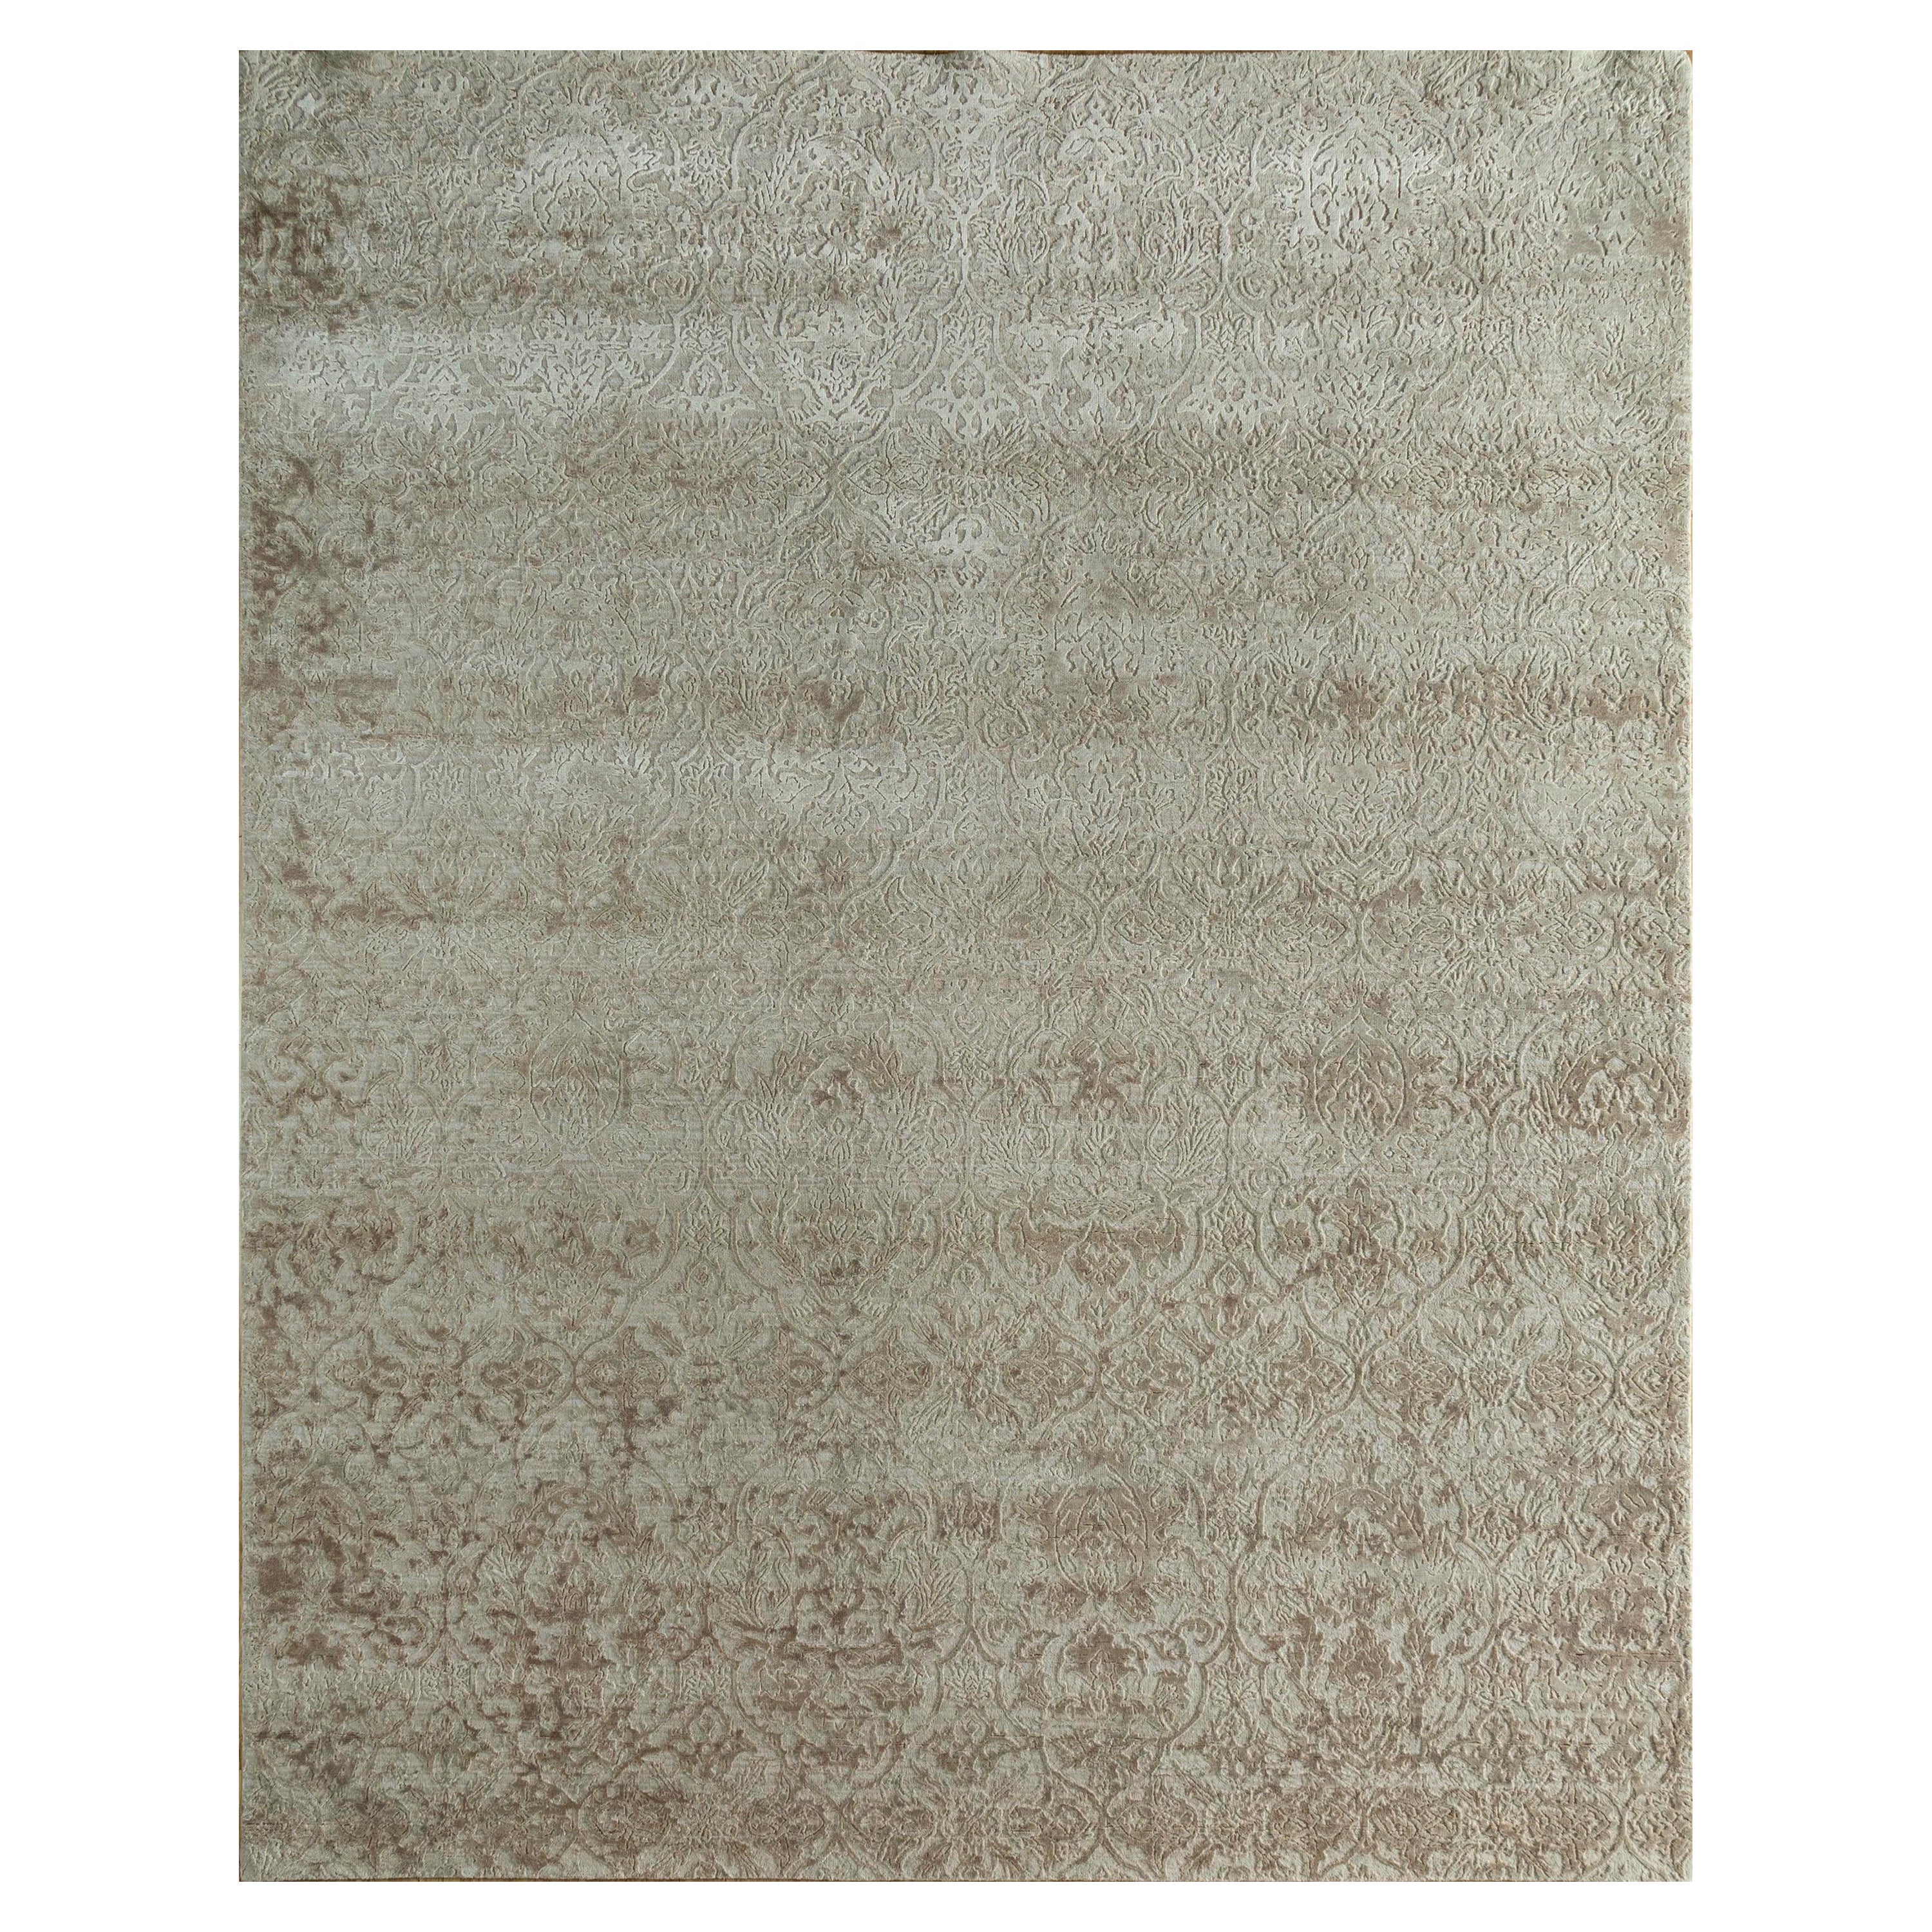 Prismatic Whisper White & antique White 300X420 Handknotted Rug For Sale